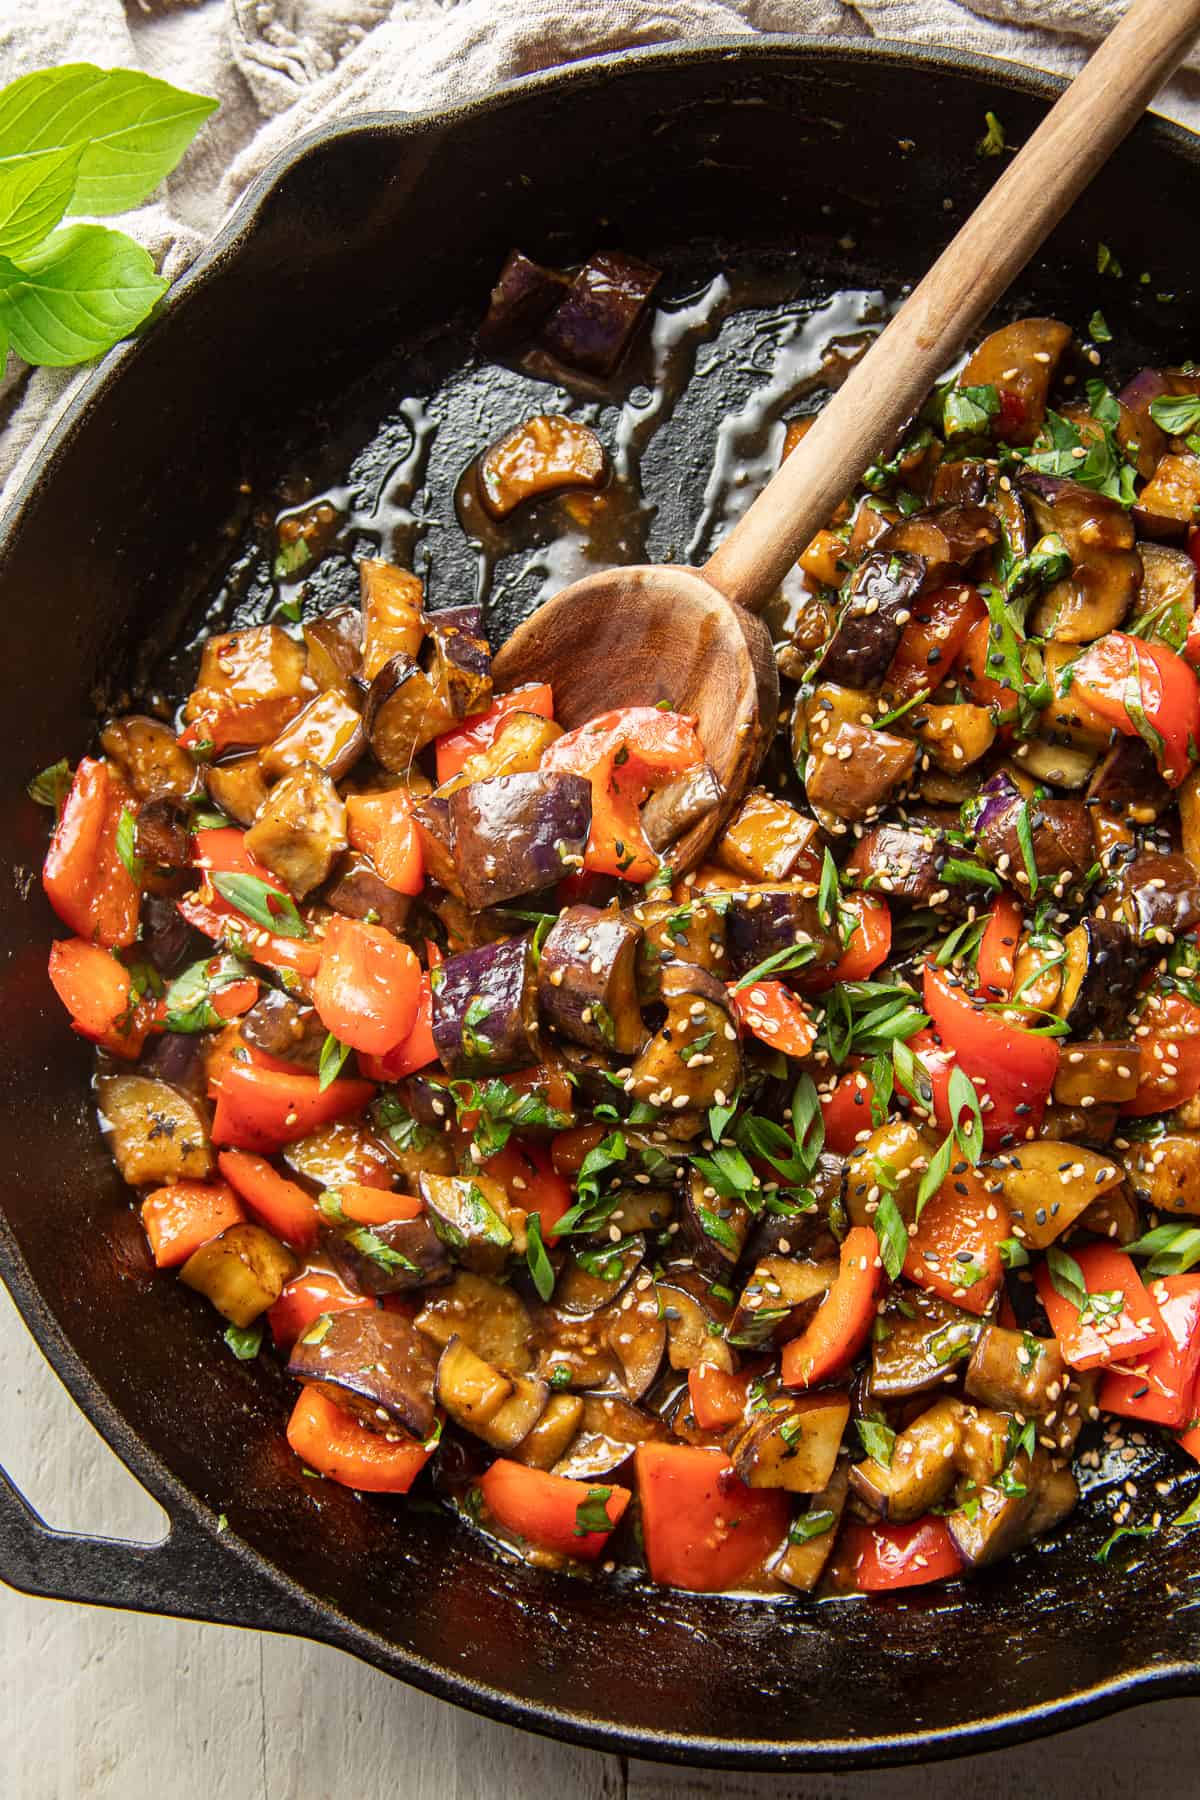 Eggplant Stir Fry in a skillet with wooden spoon.